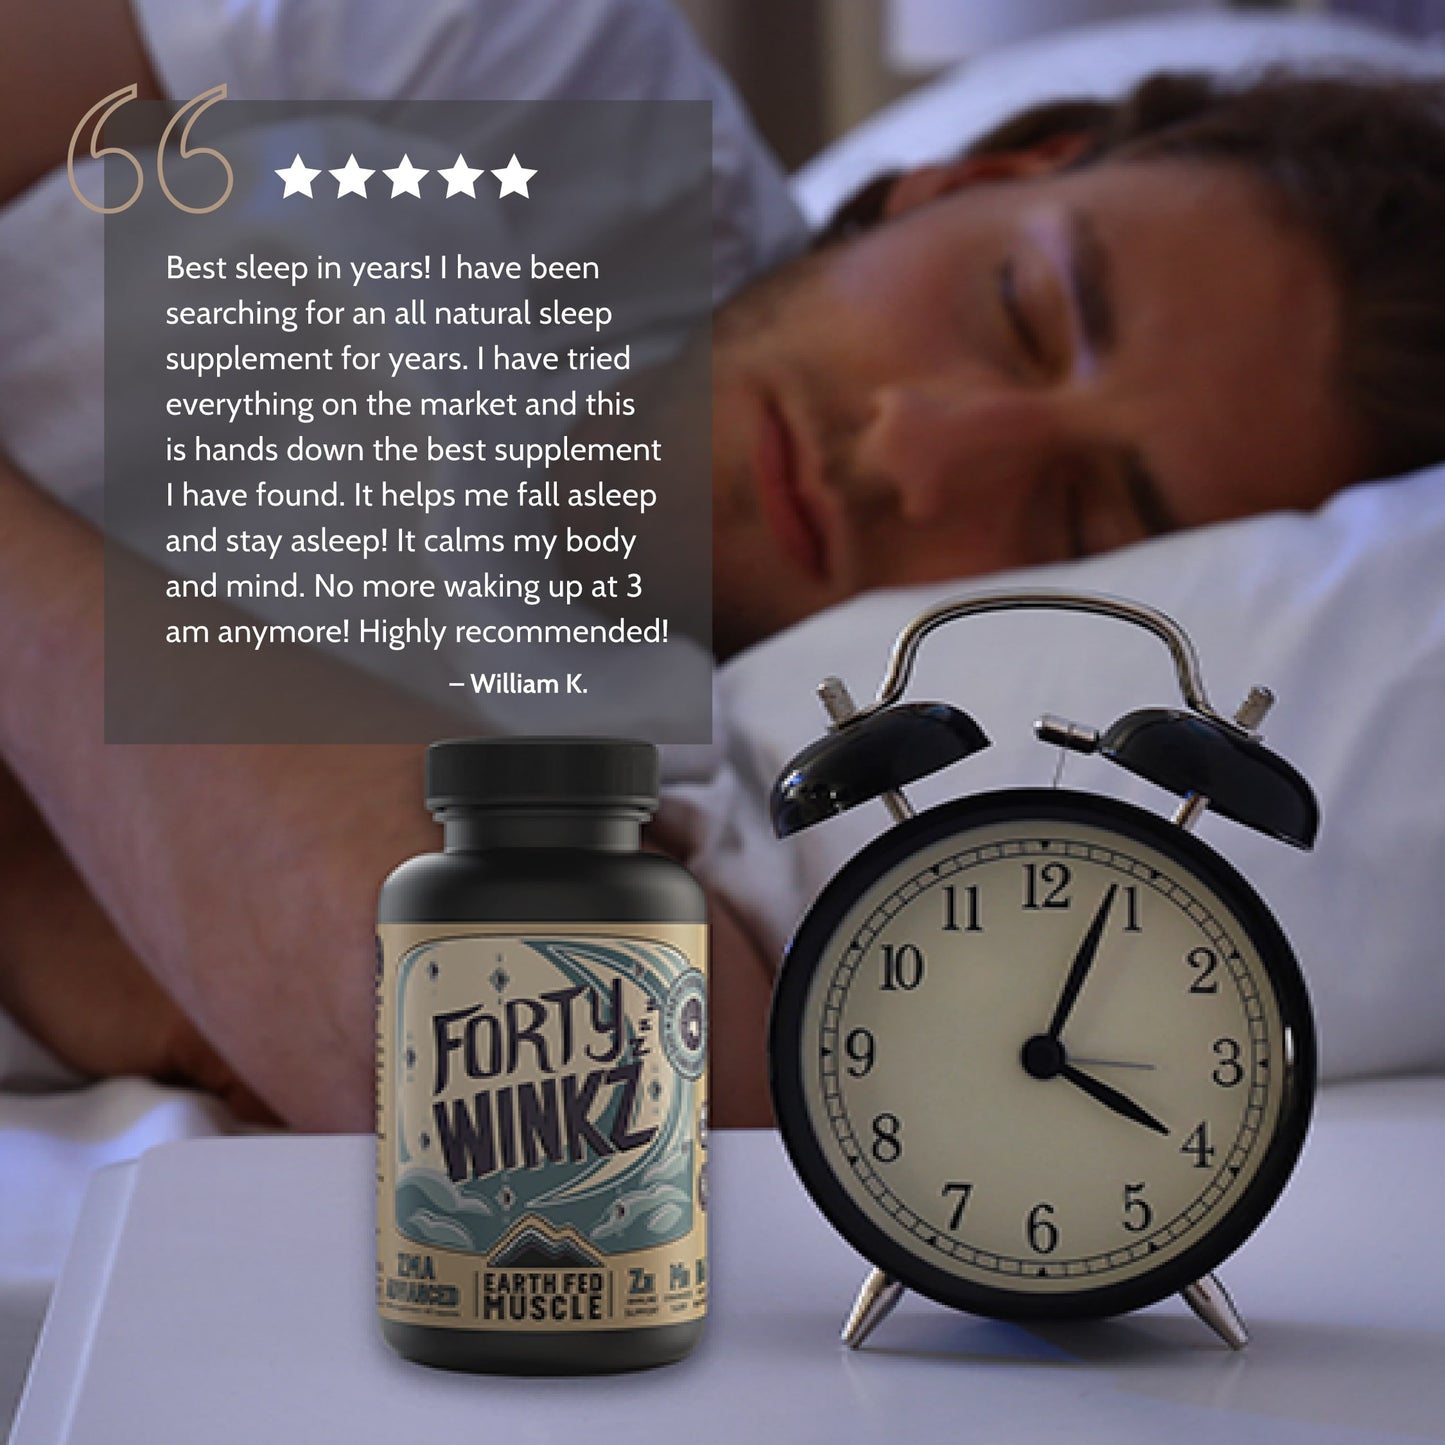 Forty Winkz Customer Review. Best Sleep In Years. Waking up at 3am